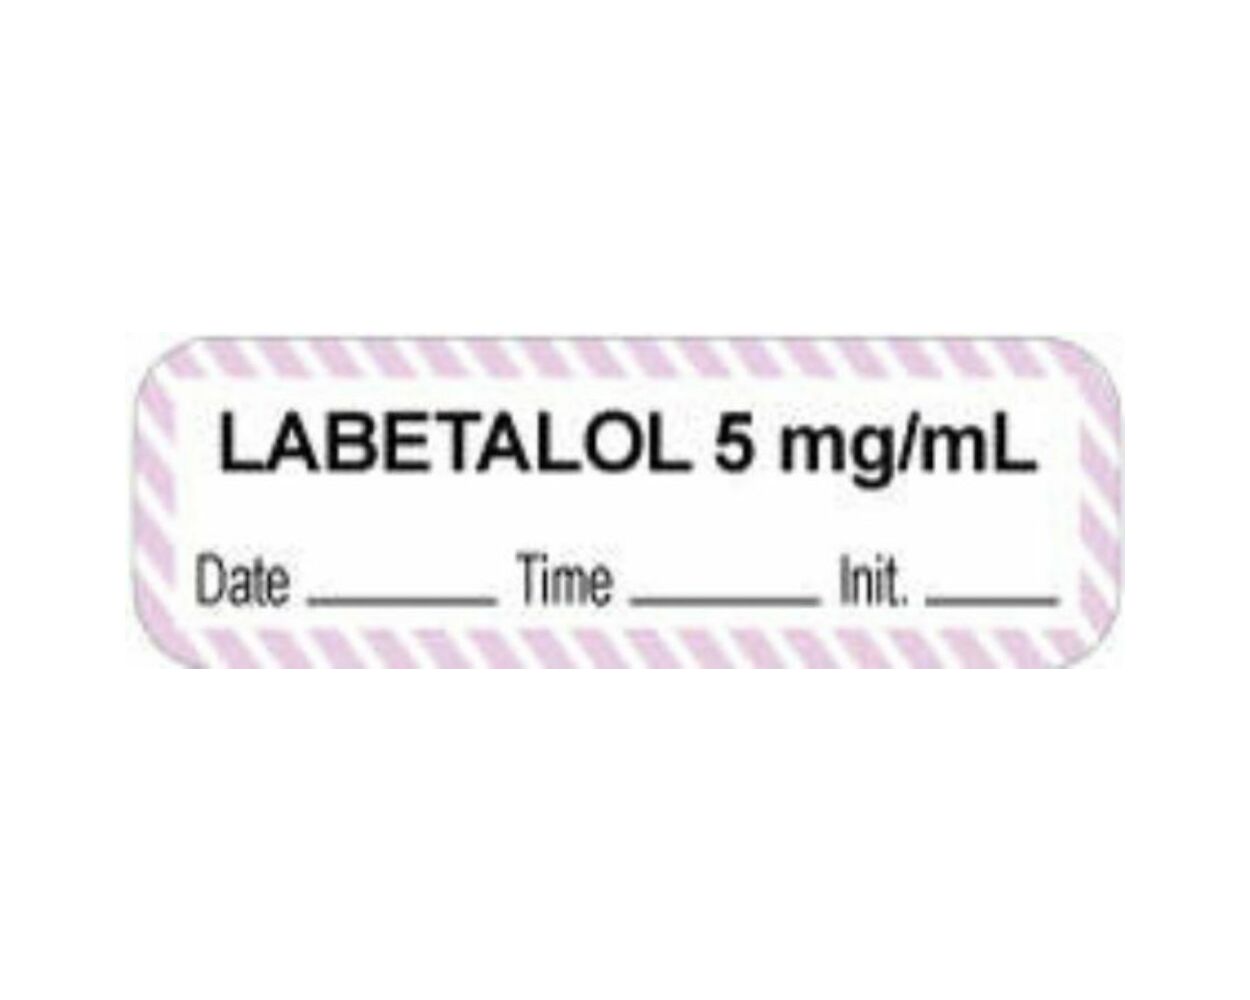 WHITE Paper ANESTHESIA LABEL - PDC (59726595)